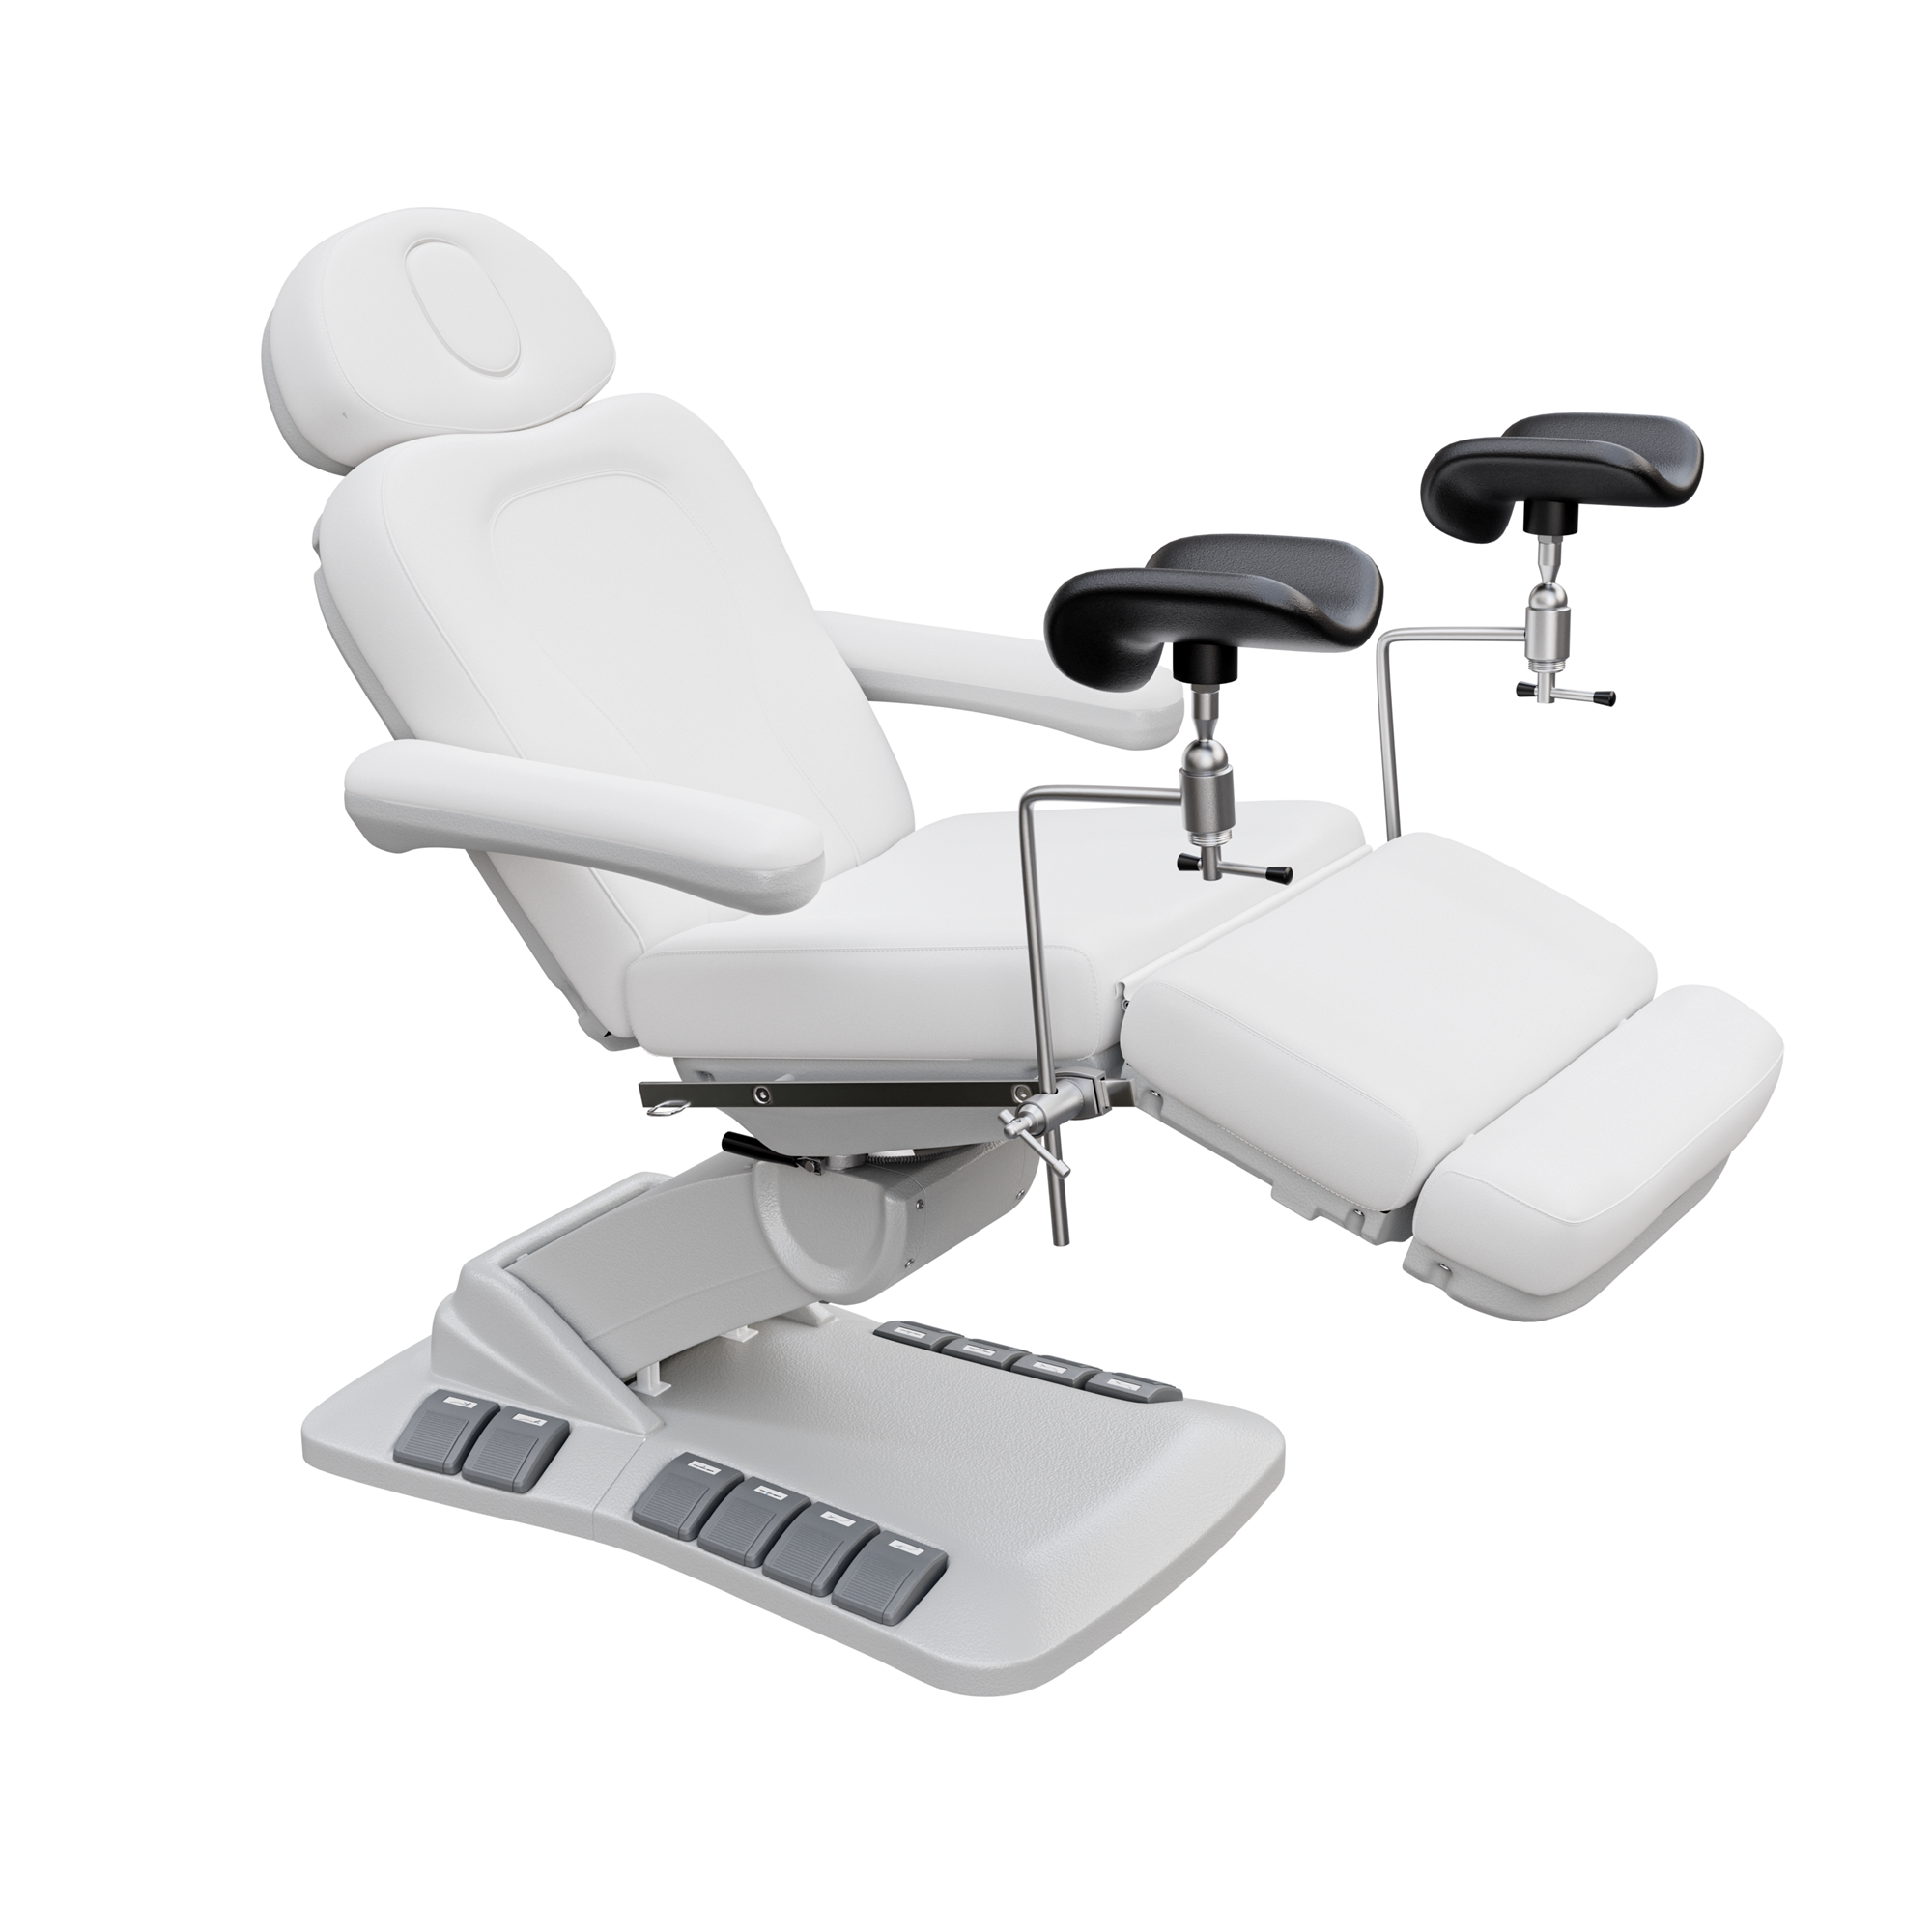 Spa Numa OB-GYN SWIVEL DELUXE 4 Motor Electric Treatment Chair Bed with Built-in Foot Pedals - 2246EB - SU-White